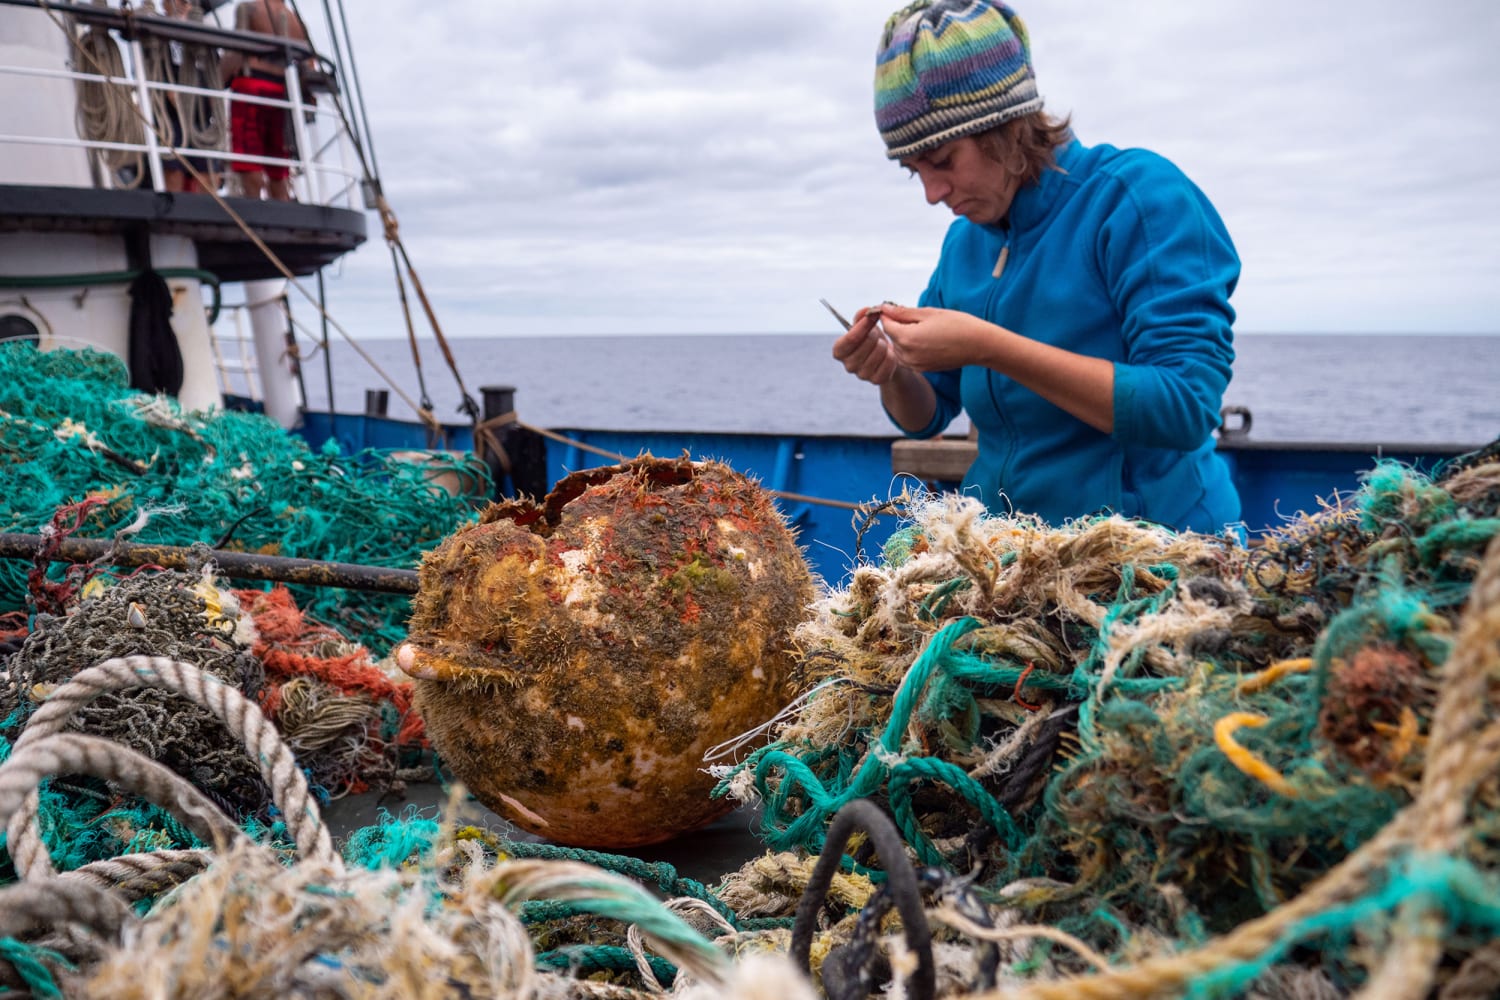 On the Great Pacific Garbage Patch, scientists find a surprise: Coastal life